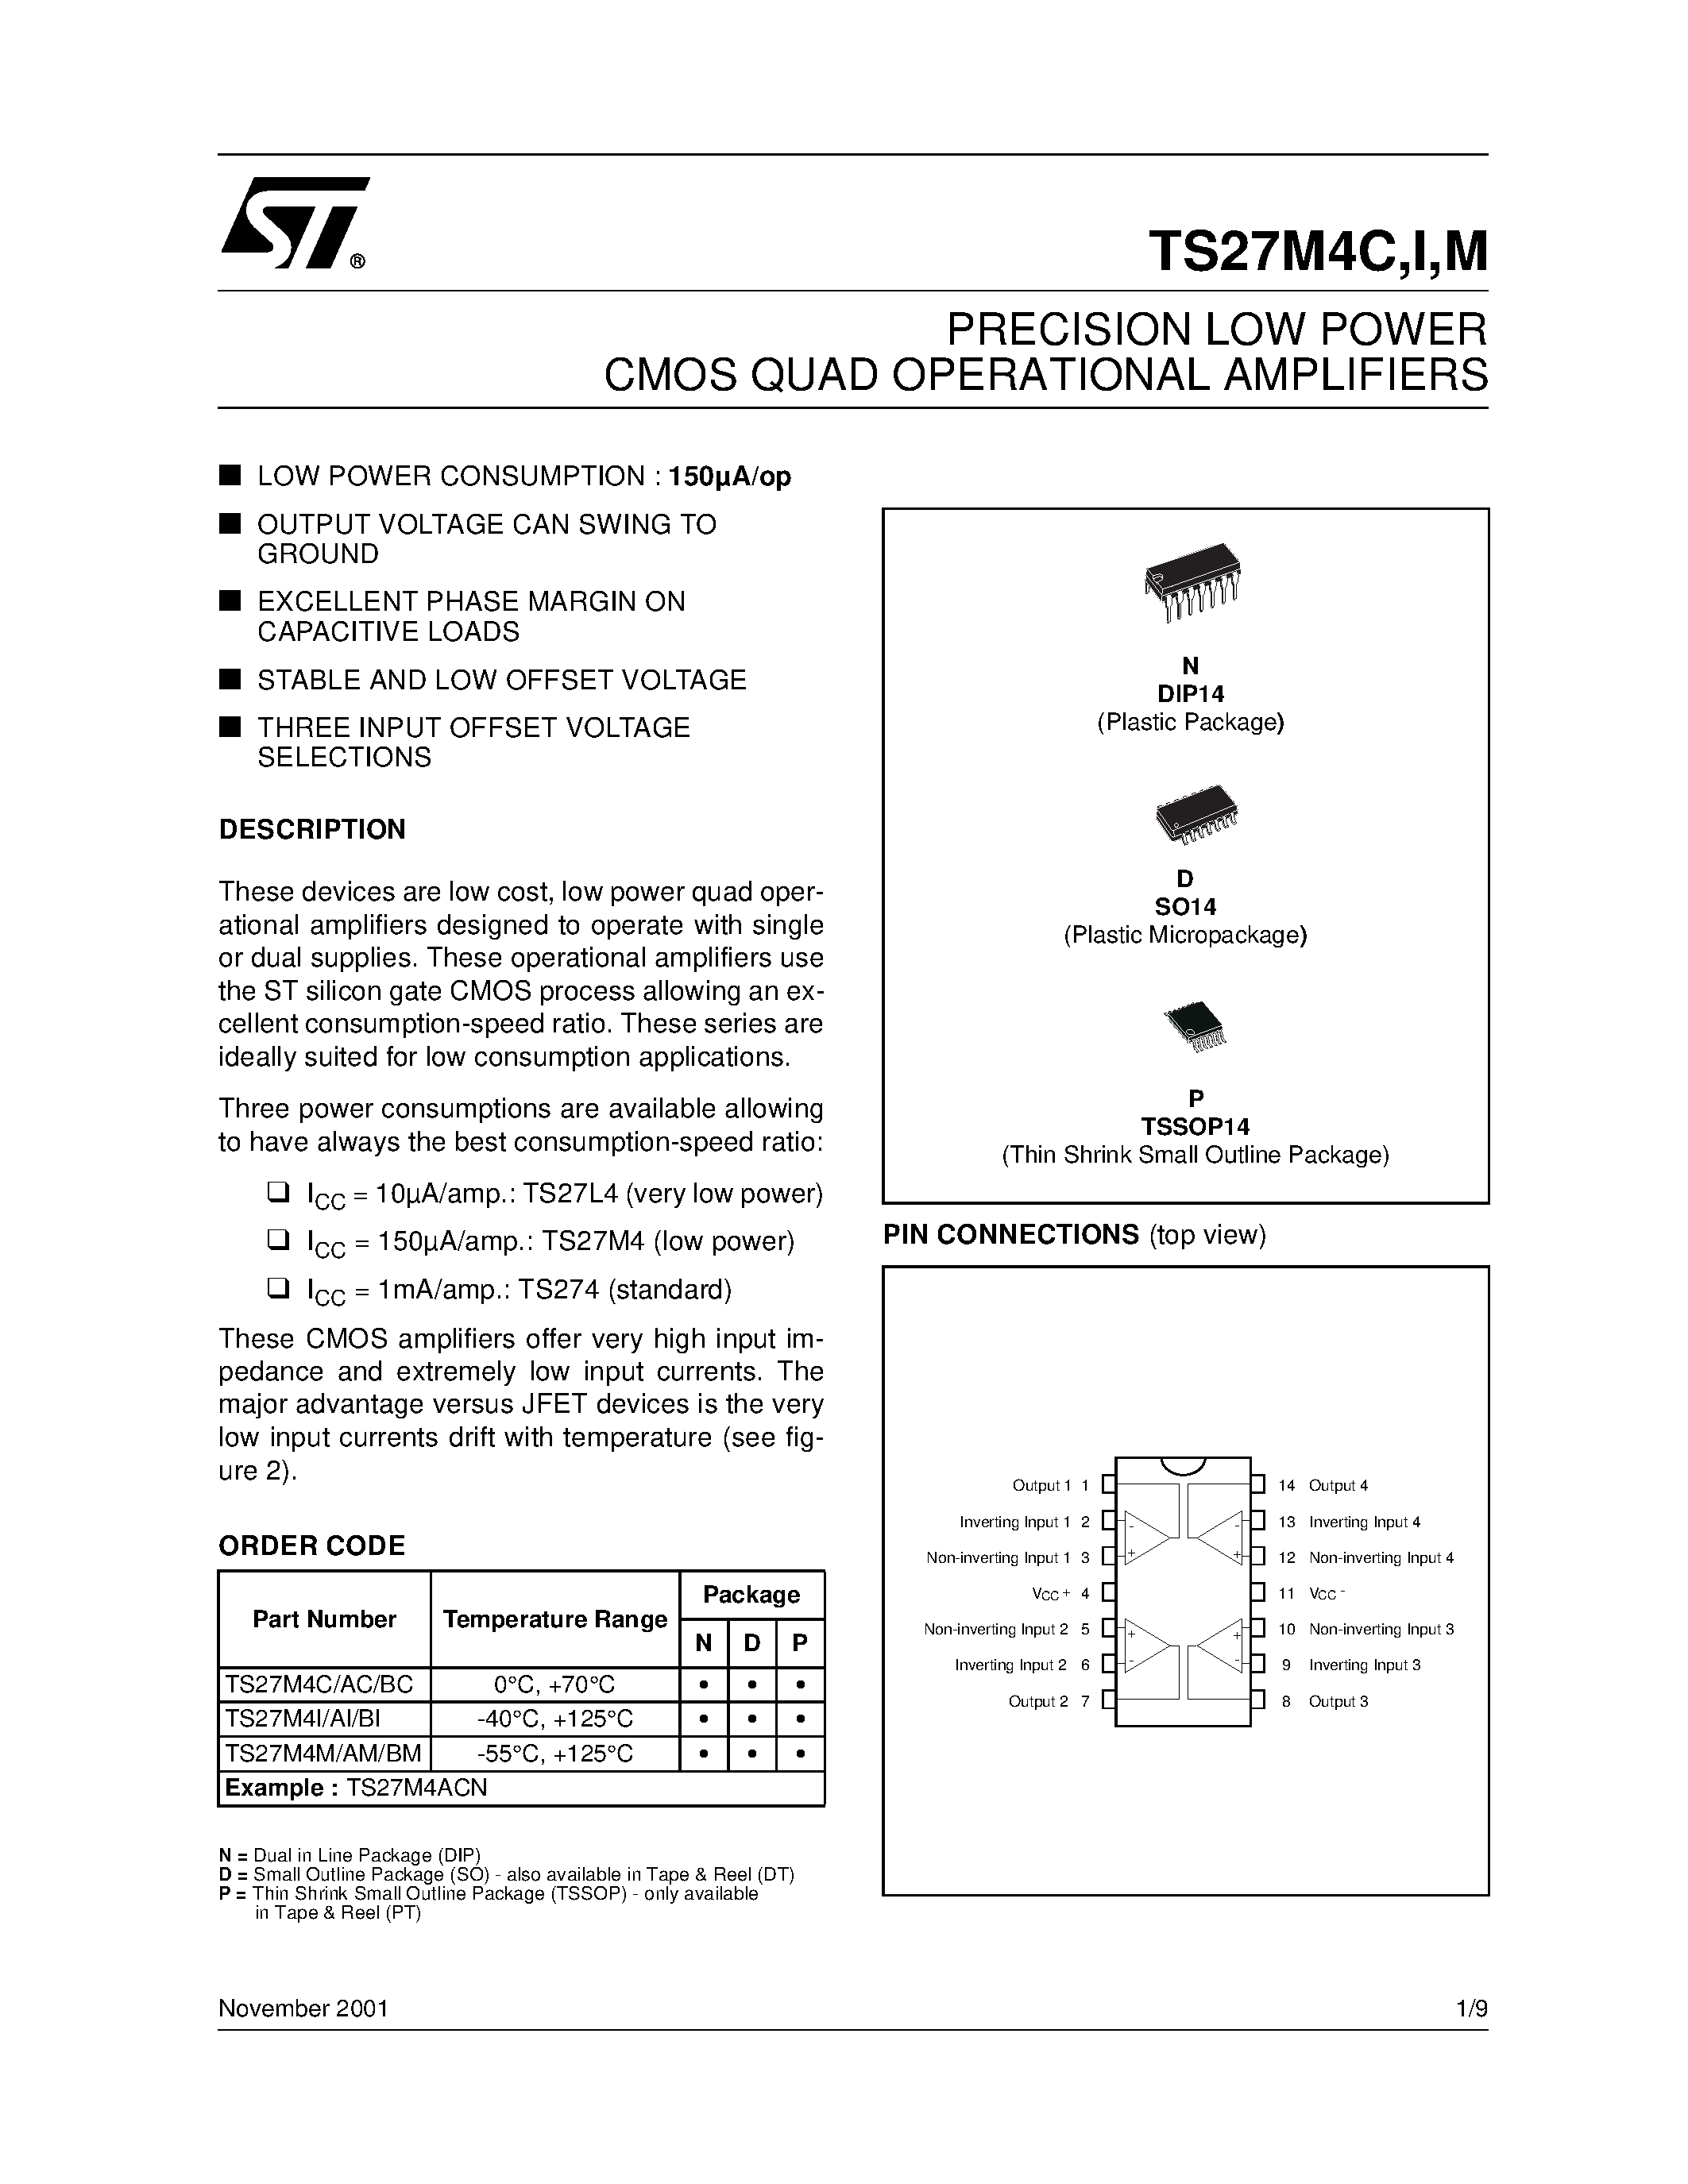 Datasheet TS27M4BC - PRECISION LOW POWER CMOS QUAD OPERATIONAL AMPLIFIERS page 1